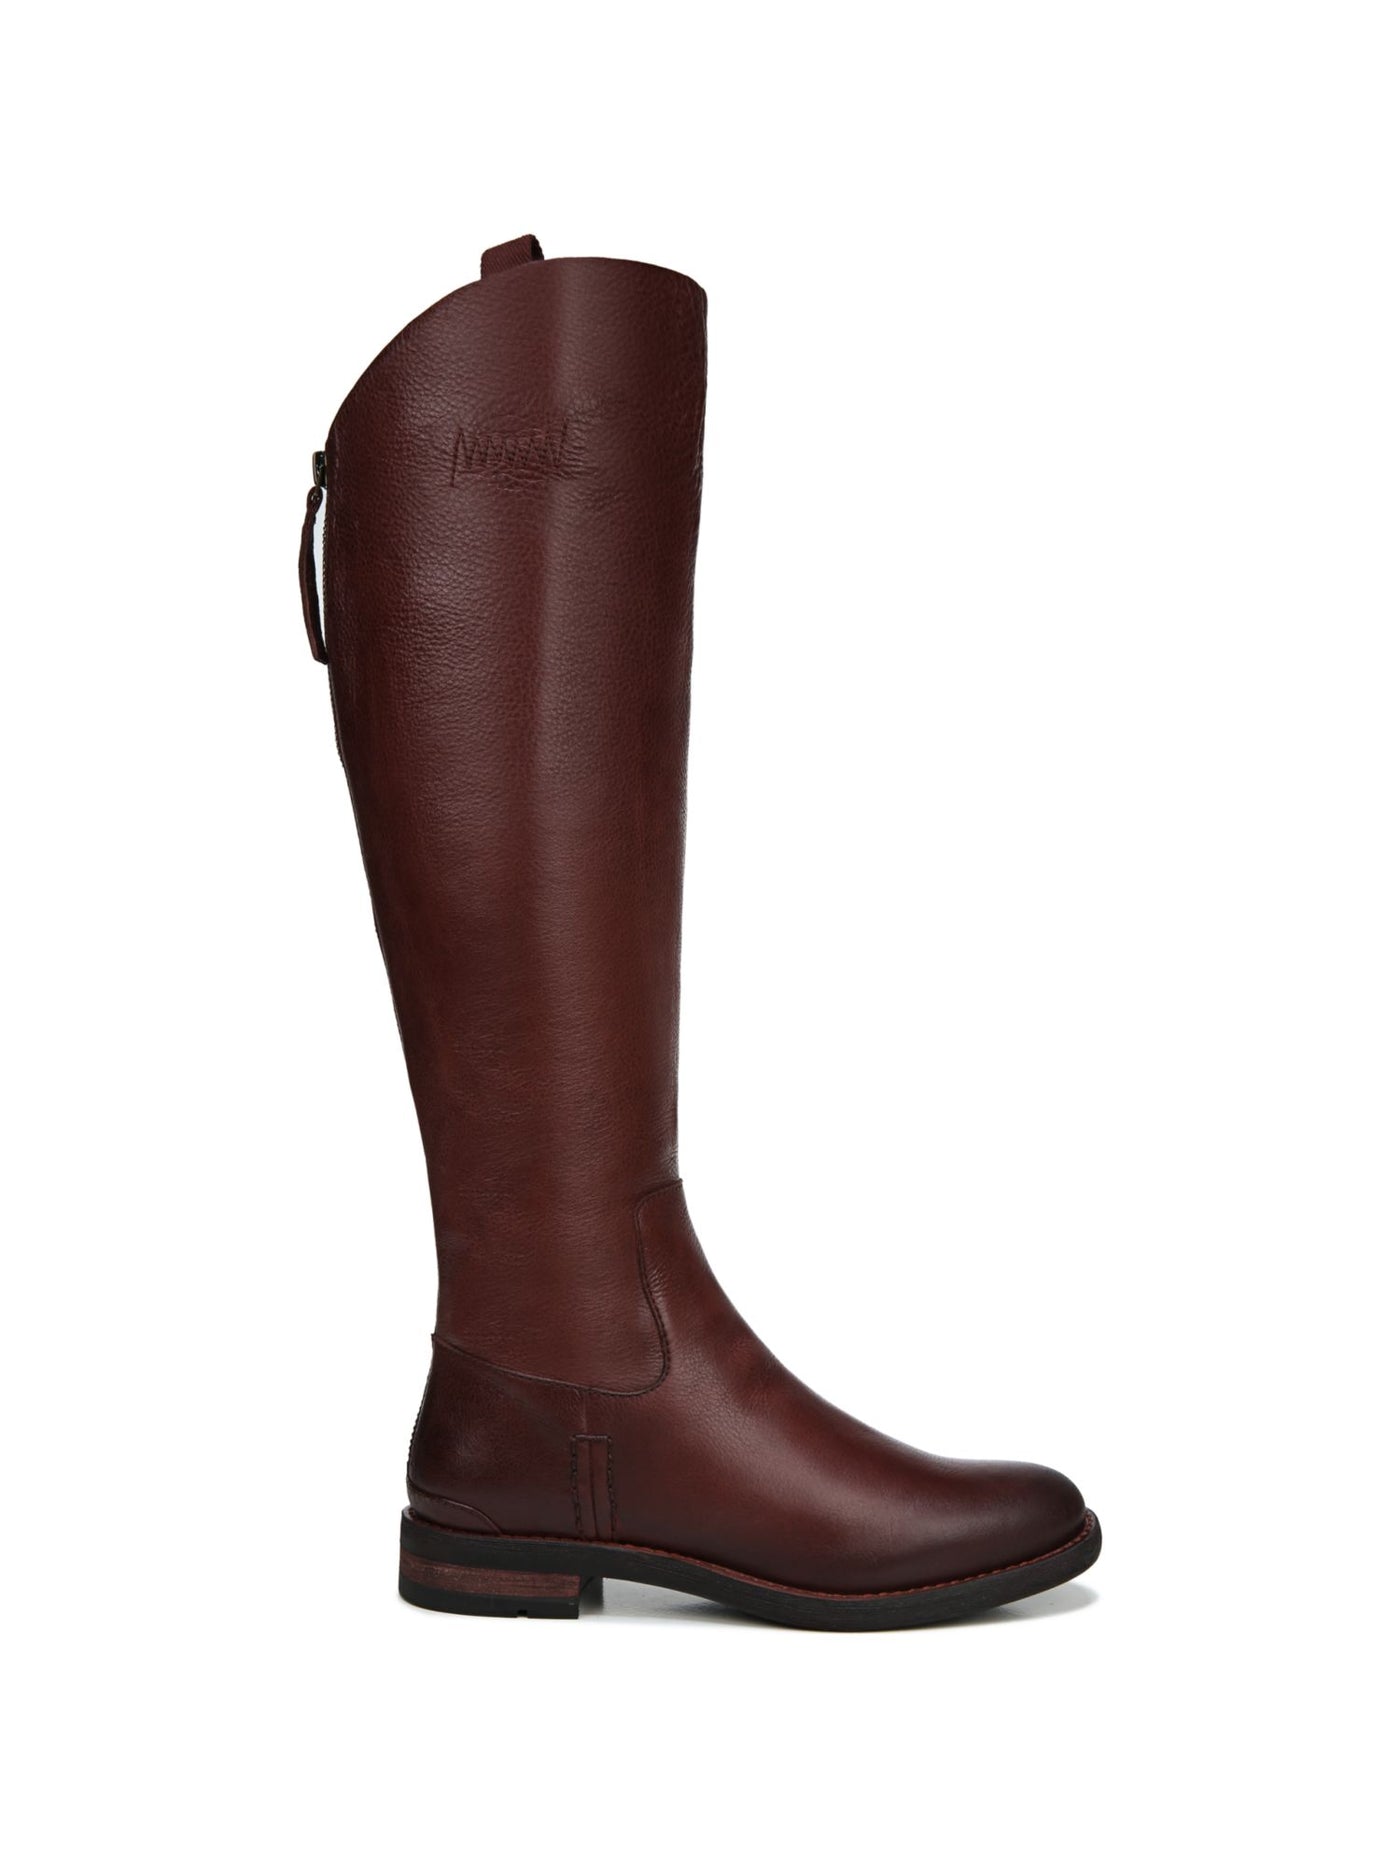 FRANCO SARTO Womens Red Stitch Detailing Padded Meyer Almond Toe Block Heel Zip-Up Leather Riding Boot 9 M